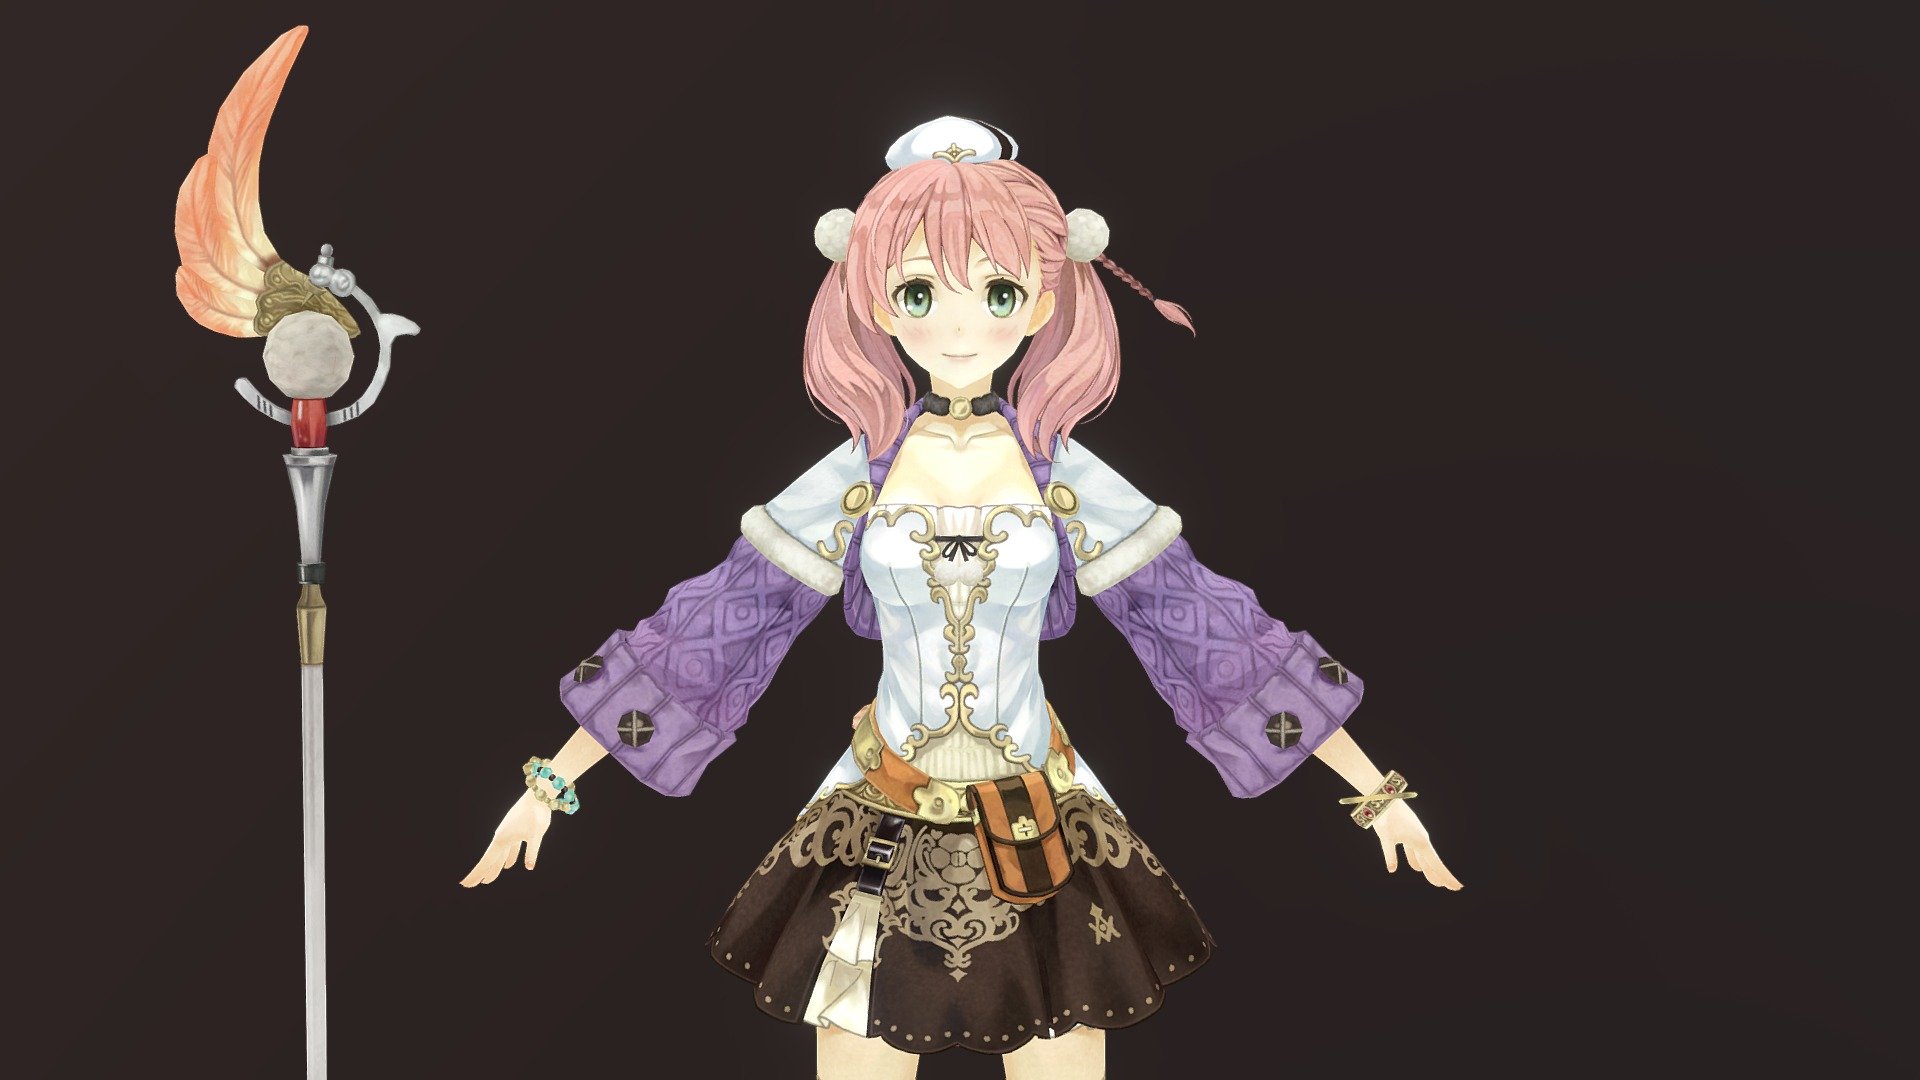 Personal Work &amp; Fan Art

Design by &lsquo;Atelier Escha &amp; Logy' Game

(I'm modfying some opacity issue in sketchfab) - Alchemist Escha - 3D model by Cecilia (@cecilia.lee) 3d model